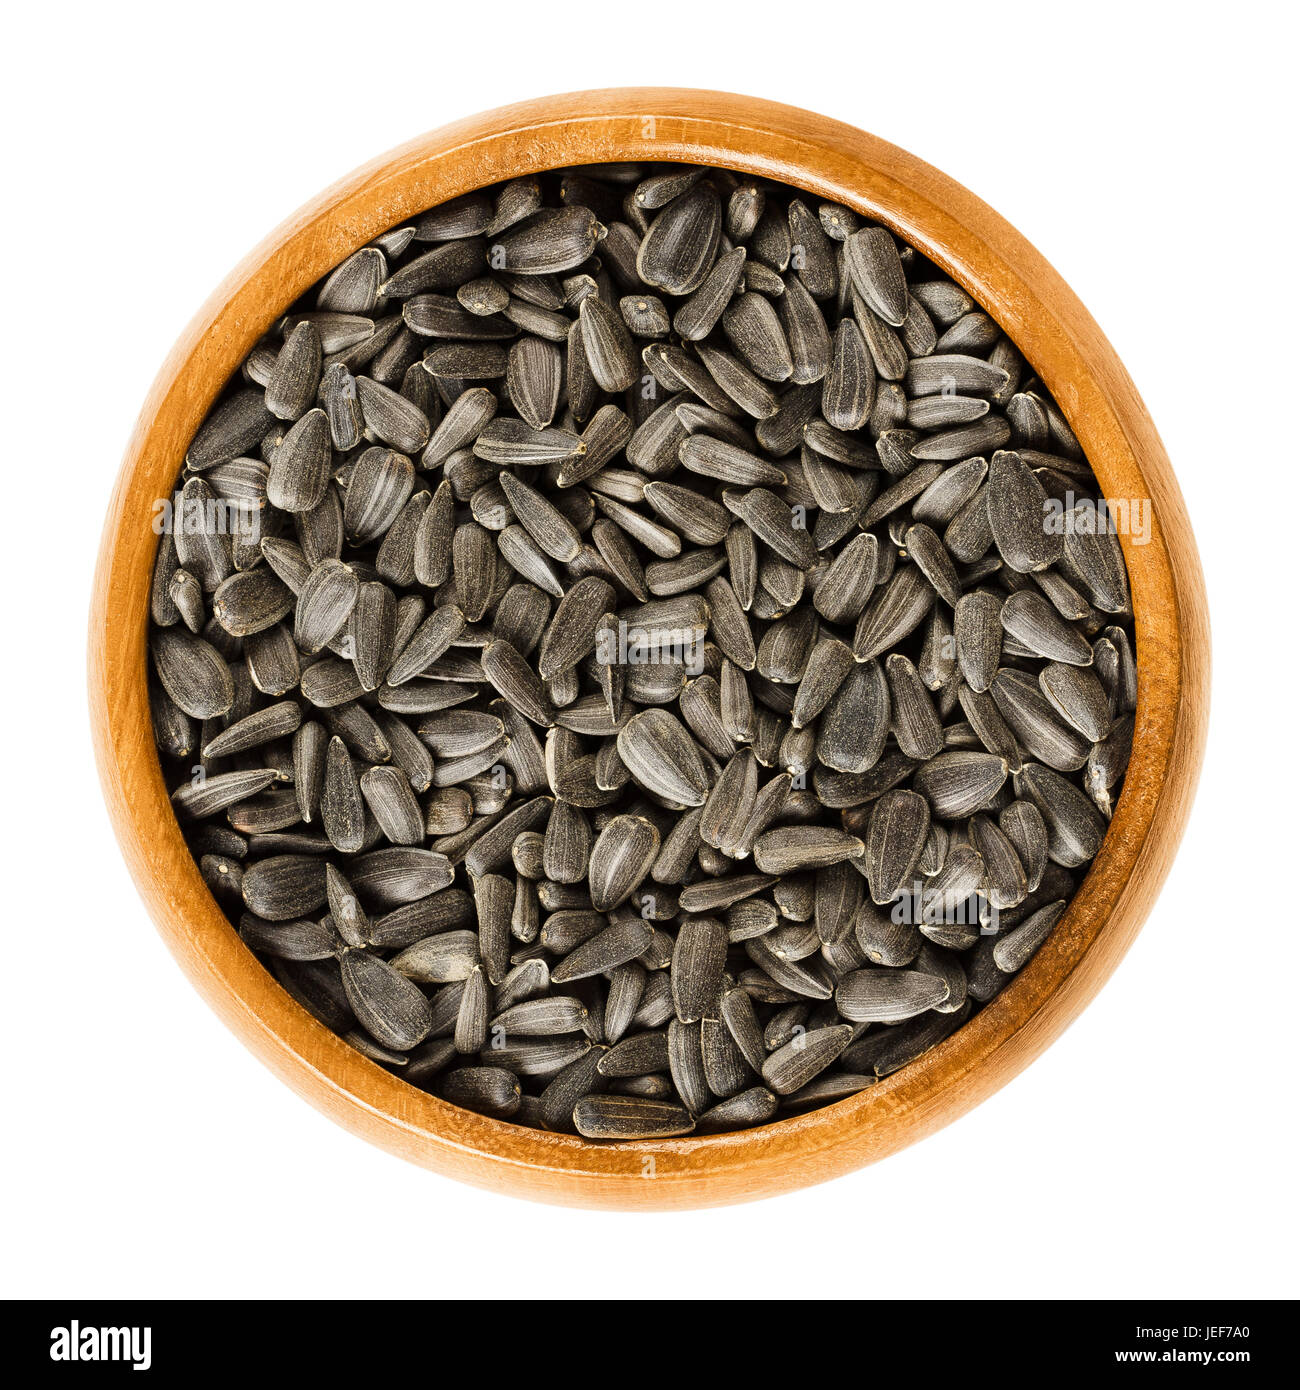 Sunflower seeds in wooden bowl. Fruits of the oilseed Helianthus Annuus, the common sunflower. Whole seeds with black hulls. Isolated macro food photo Stock Photo